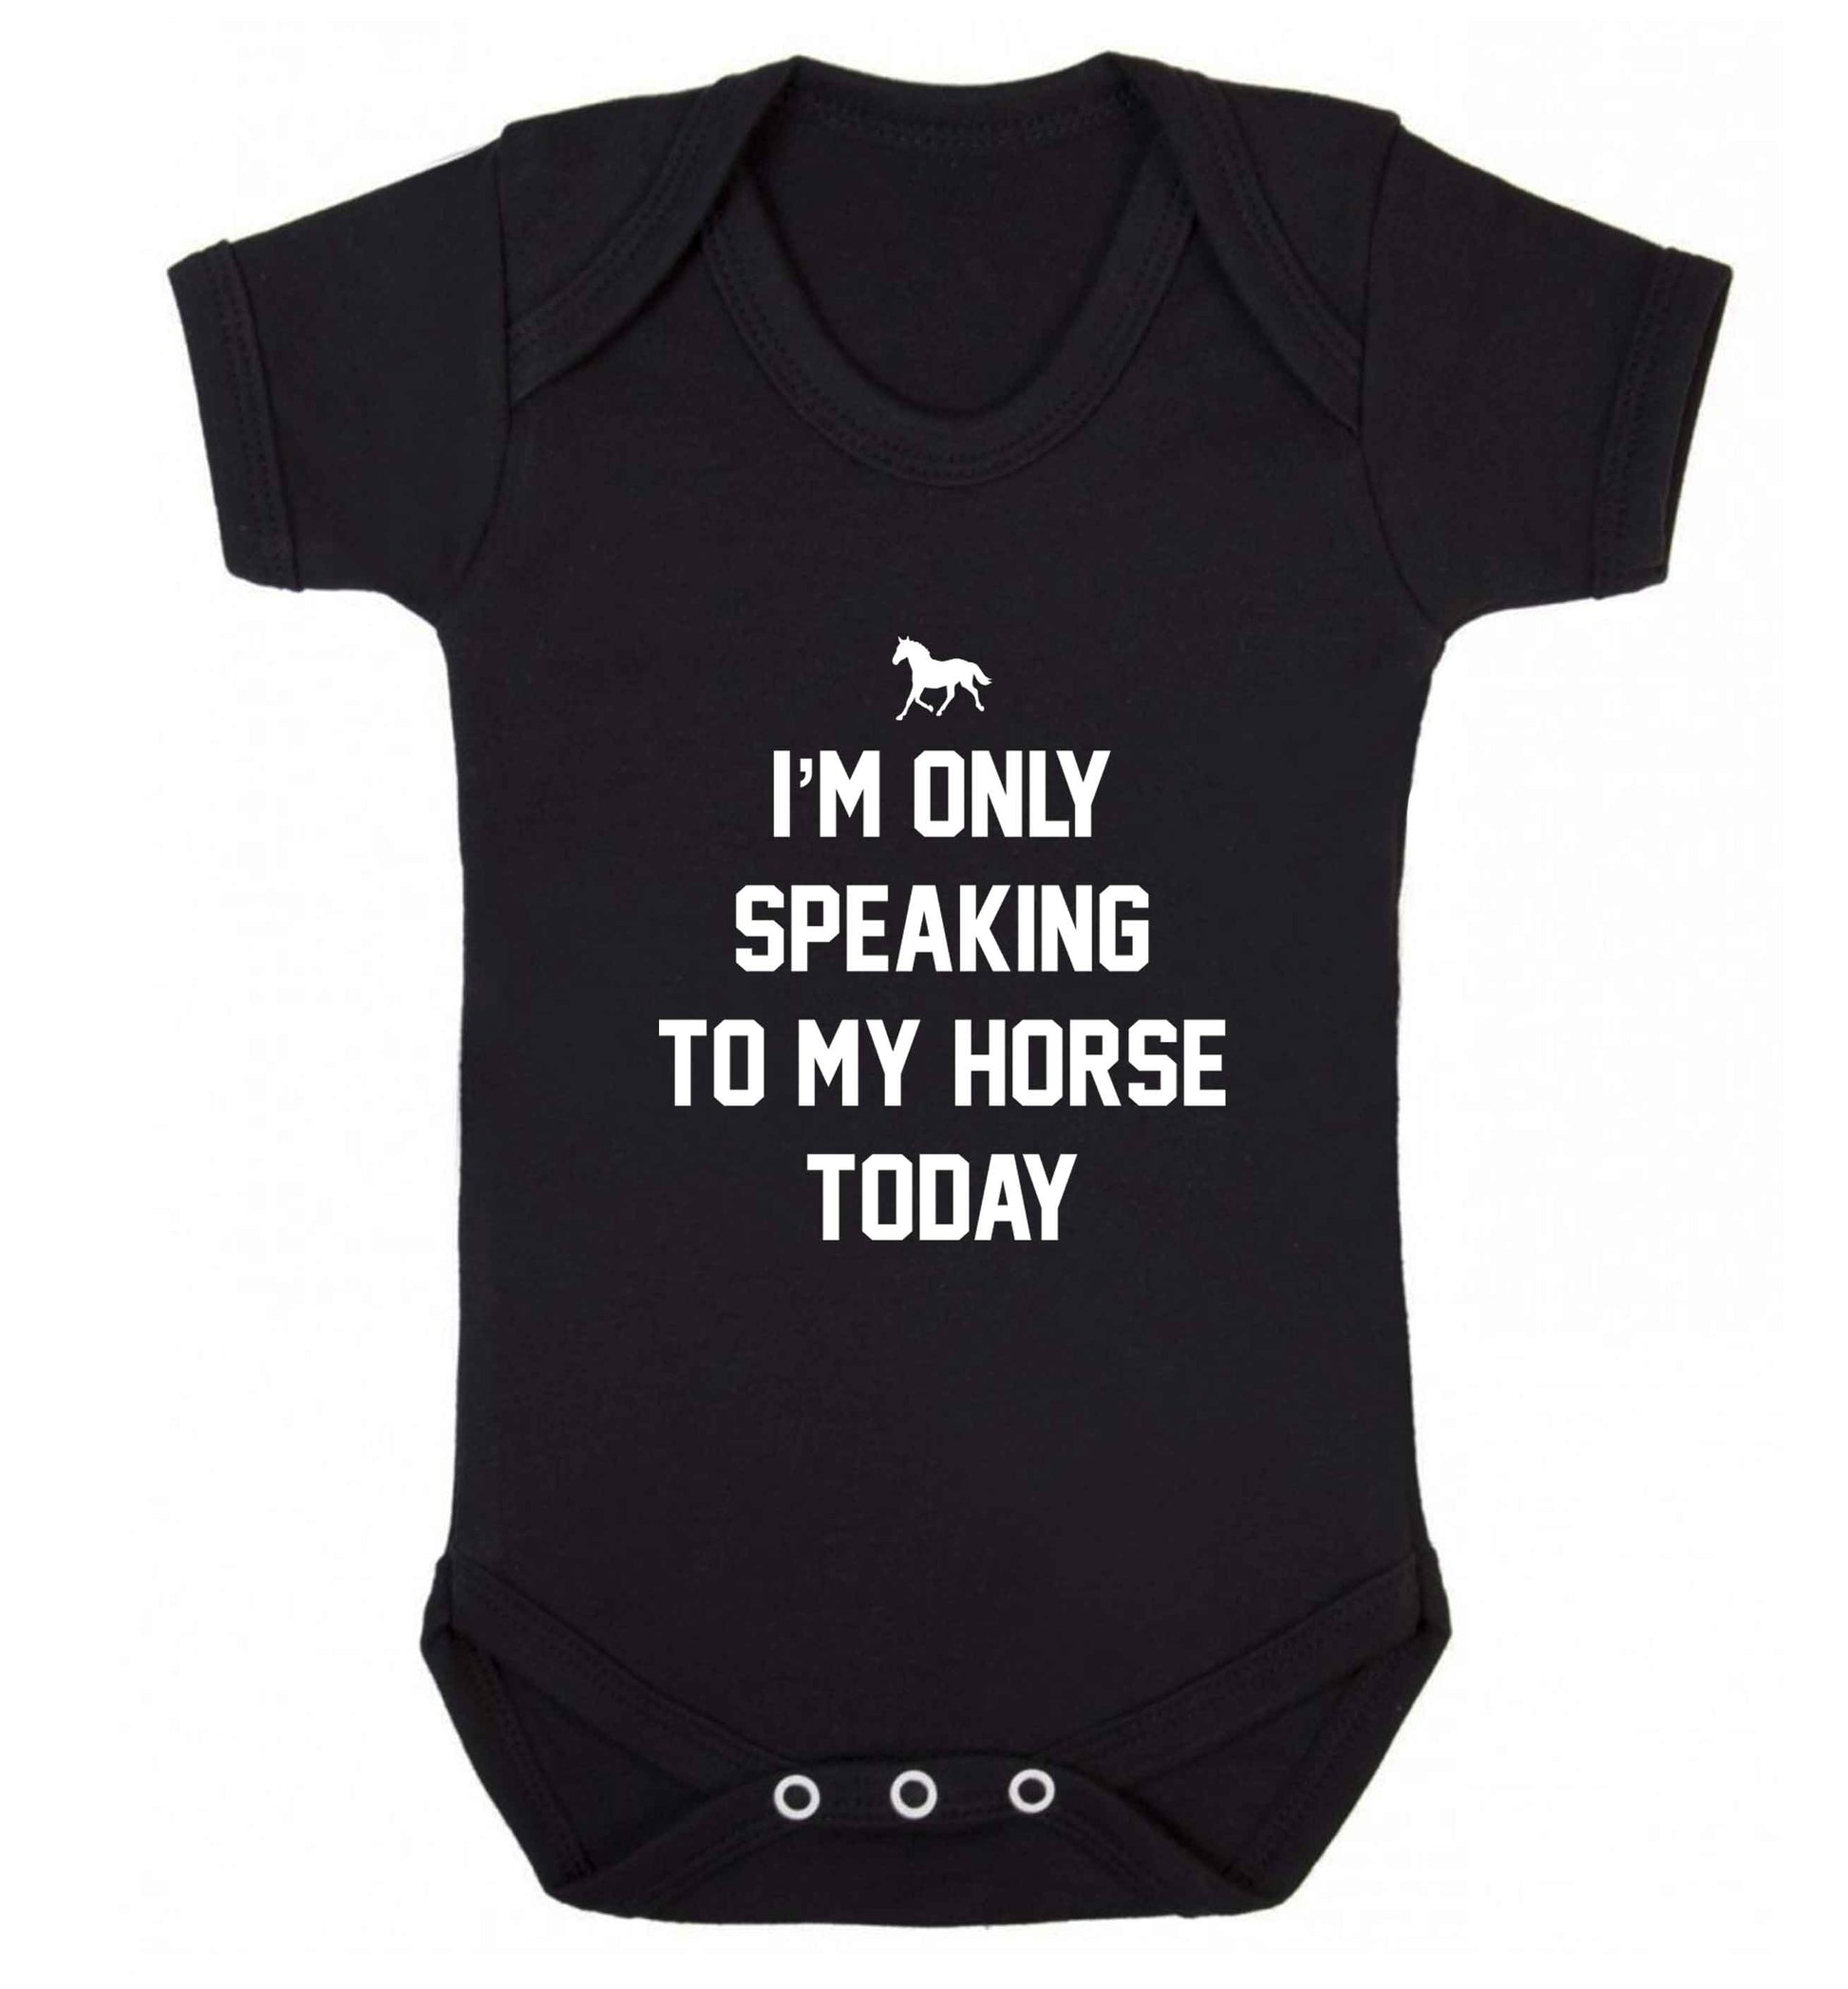 I'm only speaking to my horse today baby vest black 18-24 months